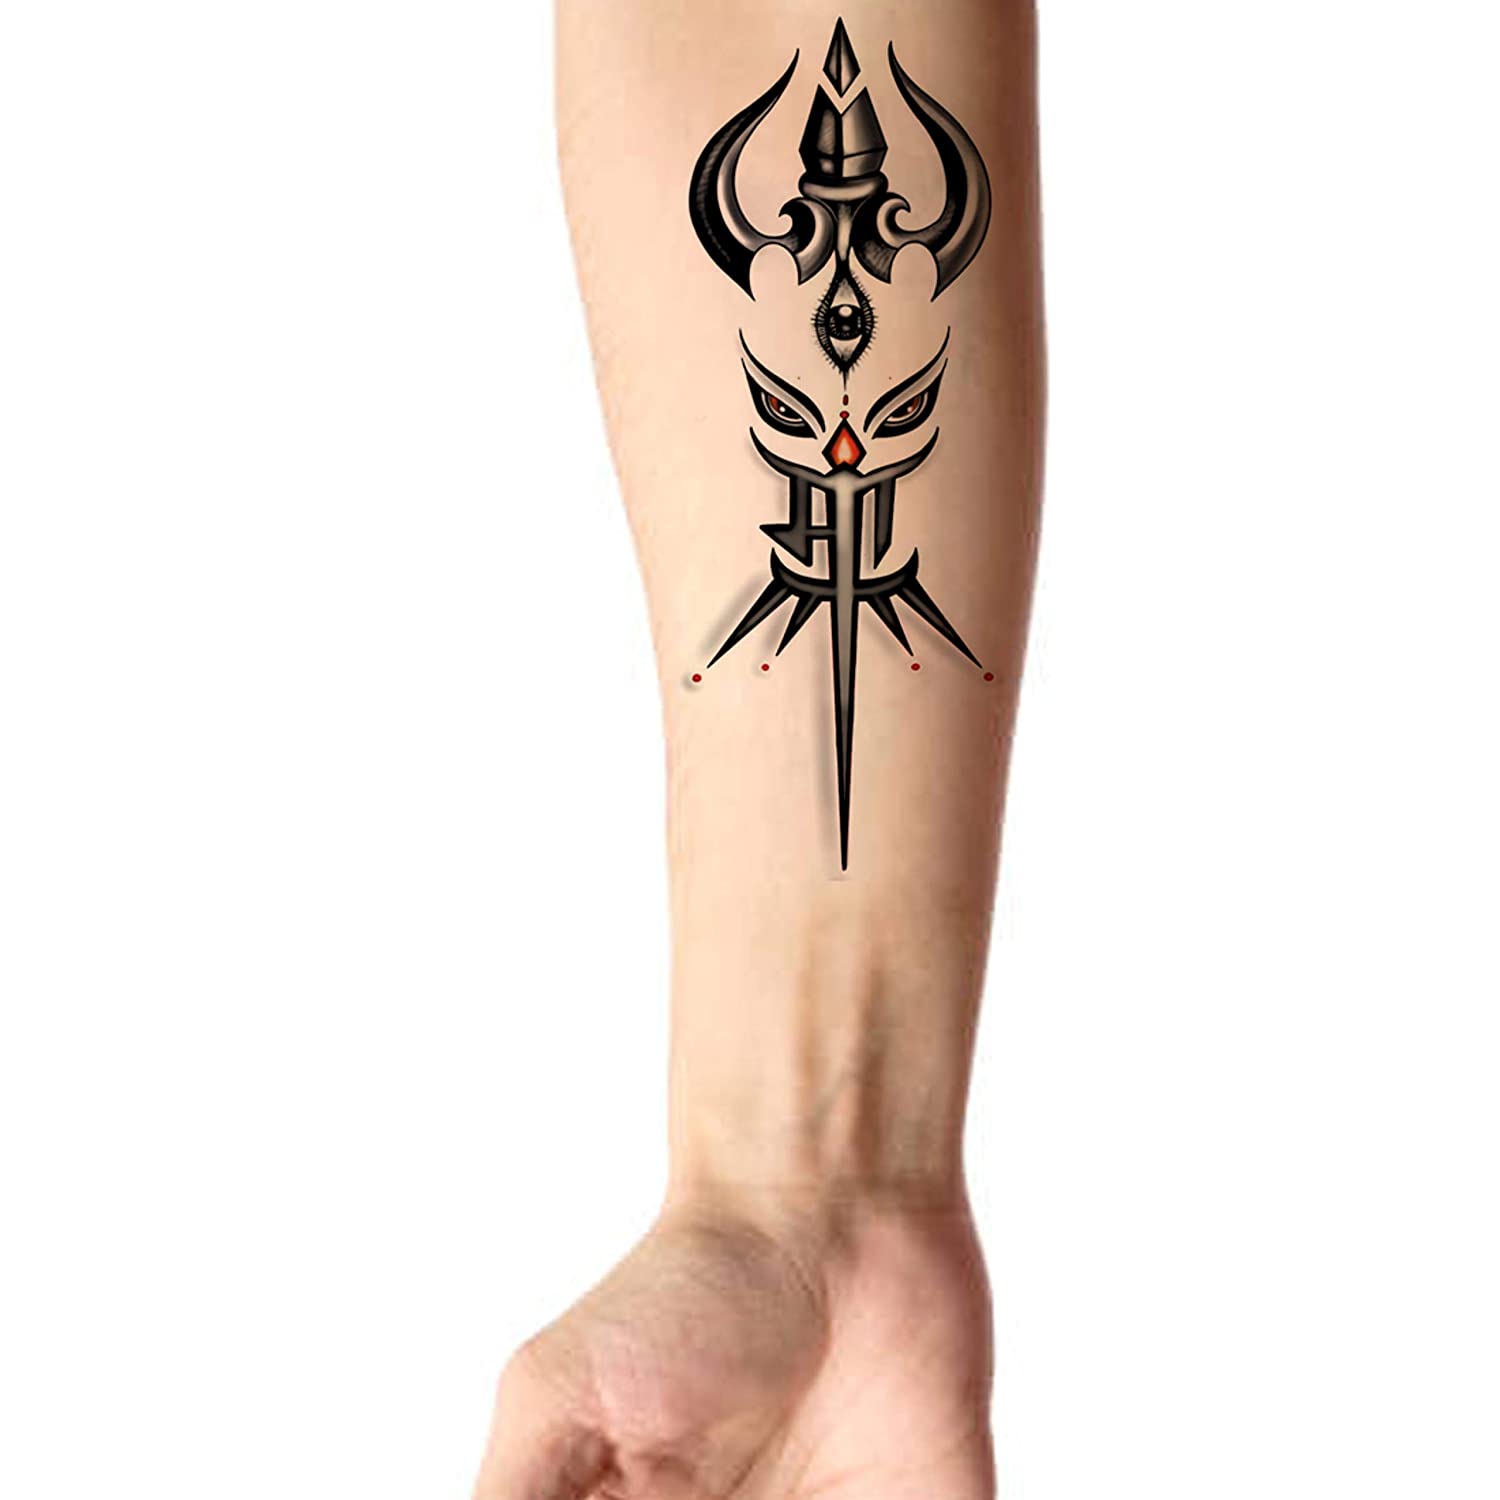 60+ Craziest & Bestest Lord Shiva Tattoos Designs You Must See Before  Getting One | Shiva tattoo design, Shiva tattoo, Om tattoo design